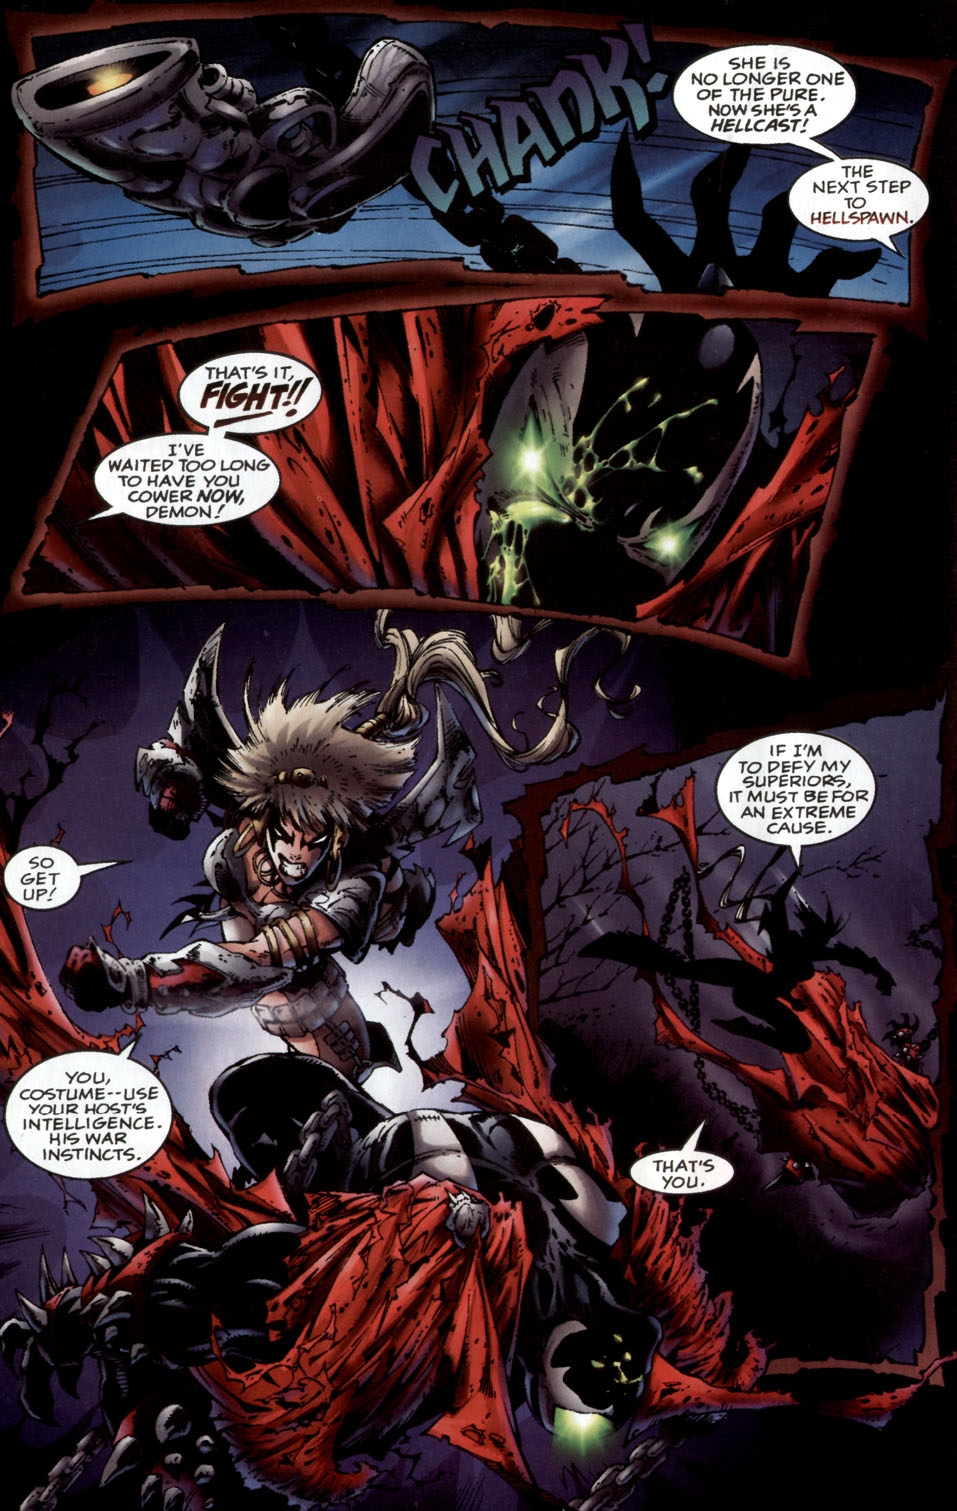 spawn vs angels - She Is No Longer One Of The Pure Now She'S A Hellcast! The Next Step To Hellspawn. That'S It, Fight!! I'Ve Waited Too Long To Have You Cower Now Demon! If I'M To Defy My Superiors, It Must Be For An Extreme Cause So Get Up! You, CostumeU